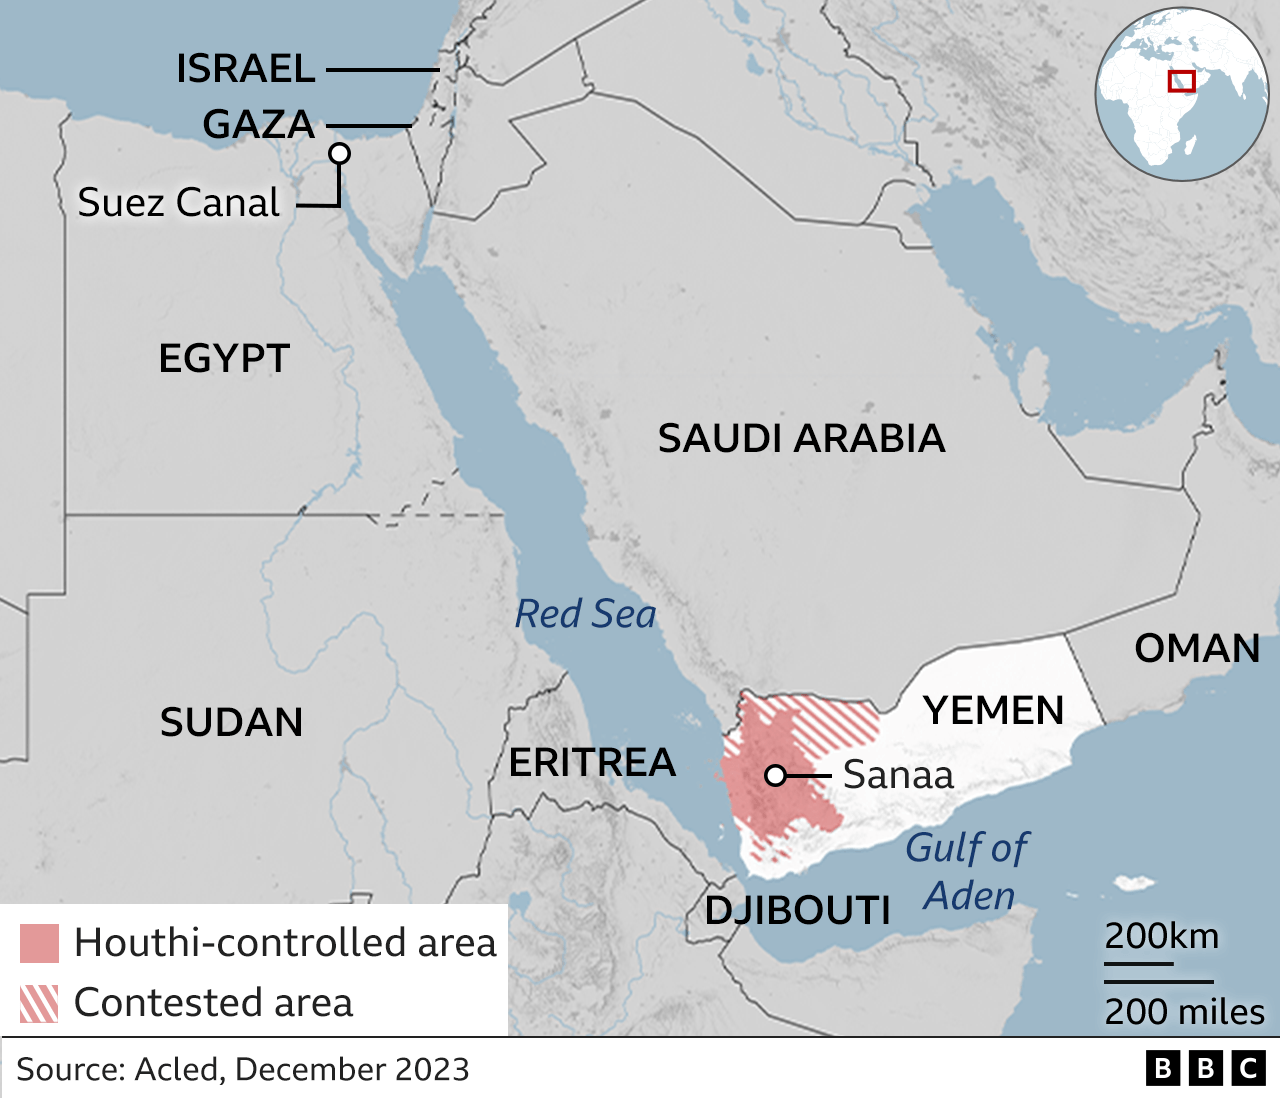 Map showing Yemen and the areas of the country controlled by the Houthis and where the country is in relation to Israel